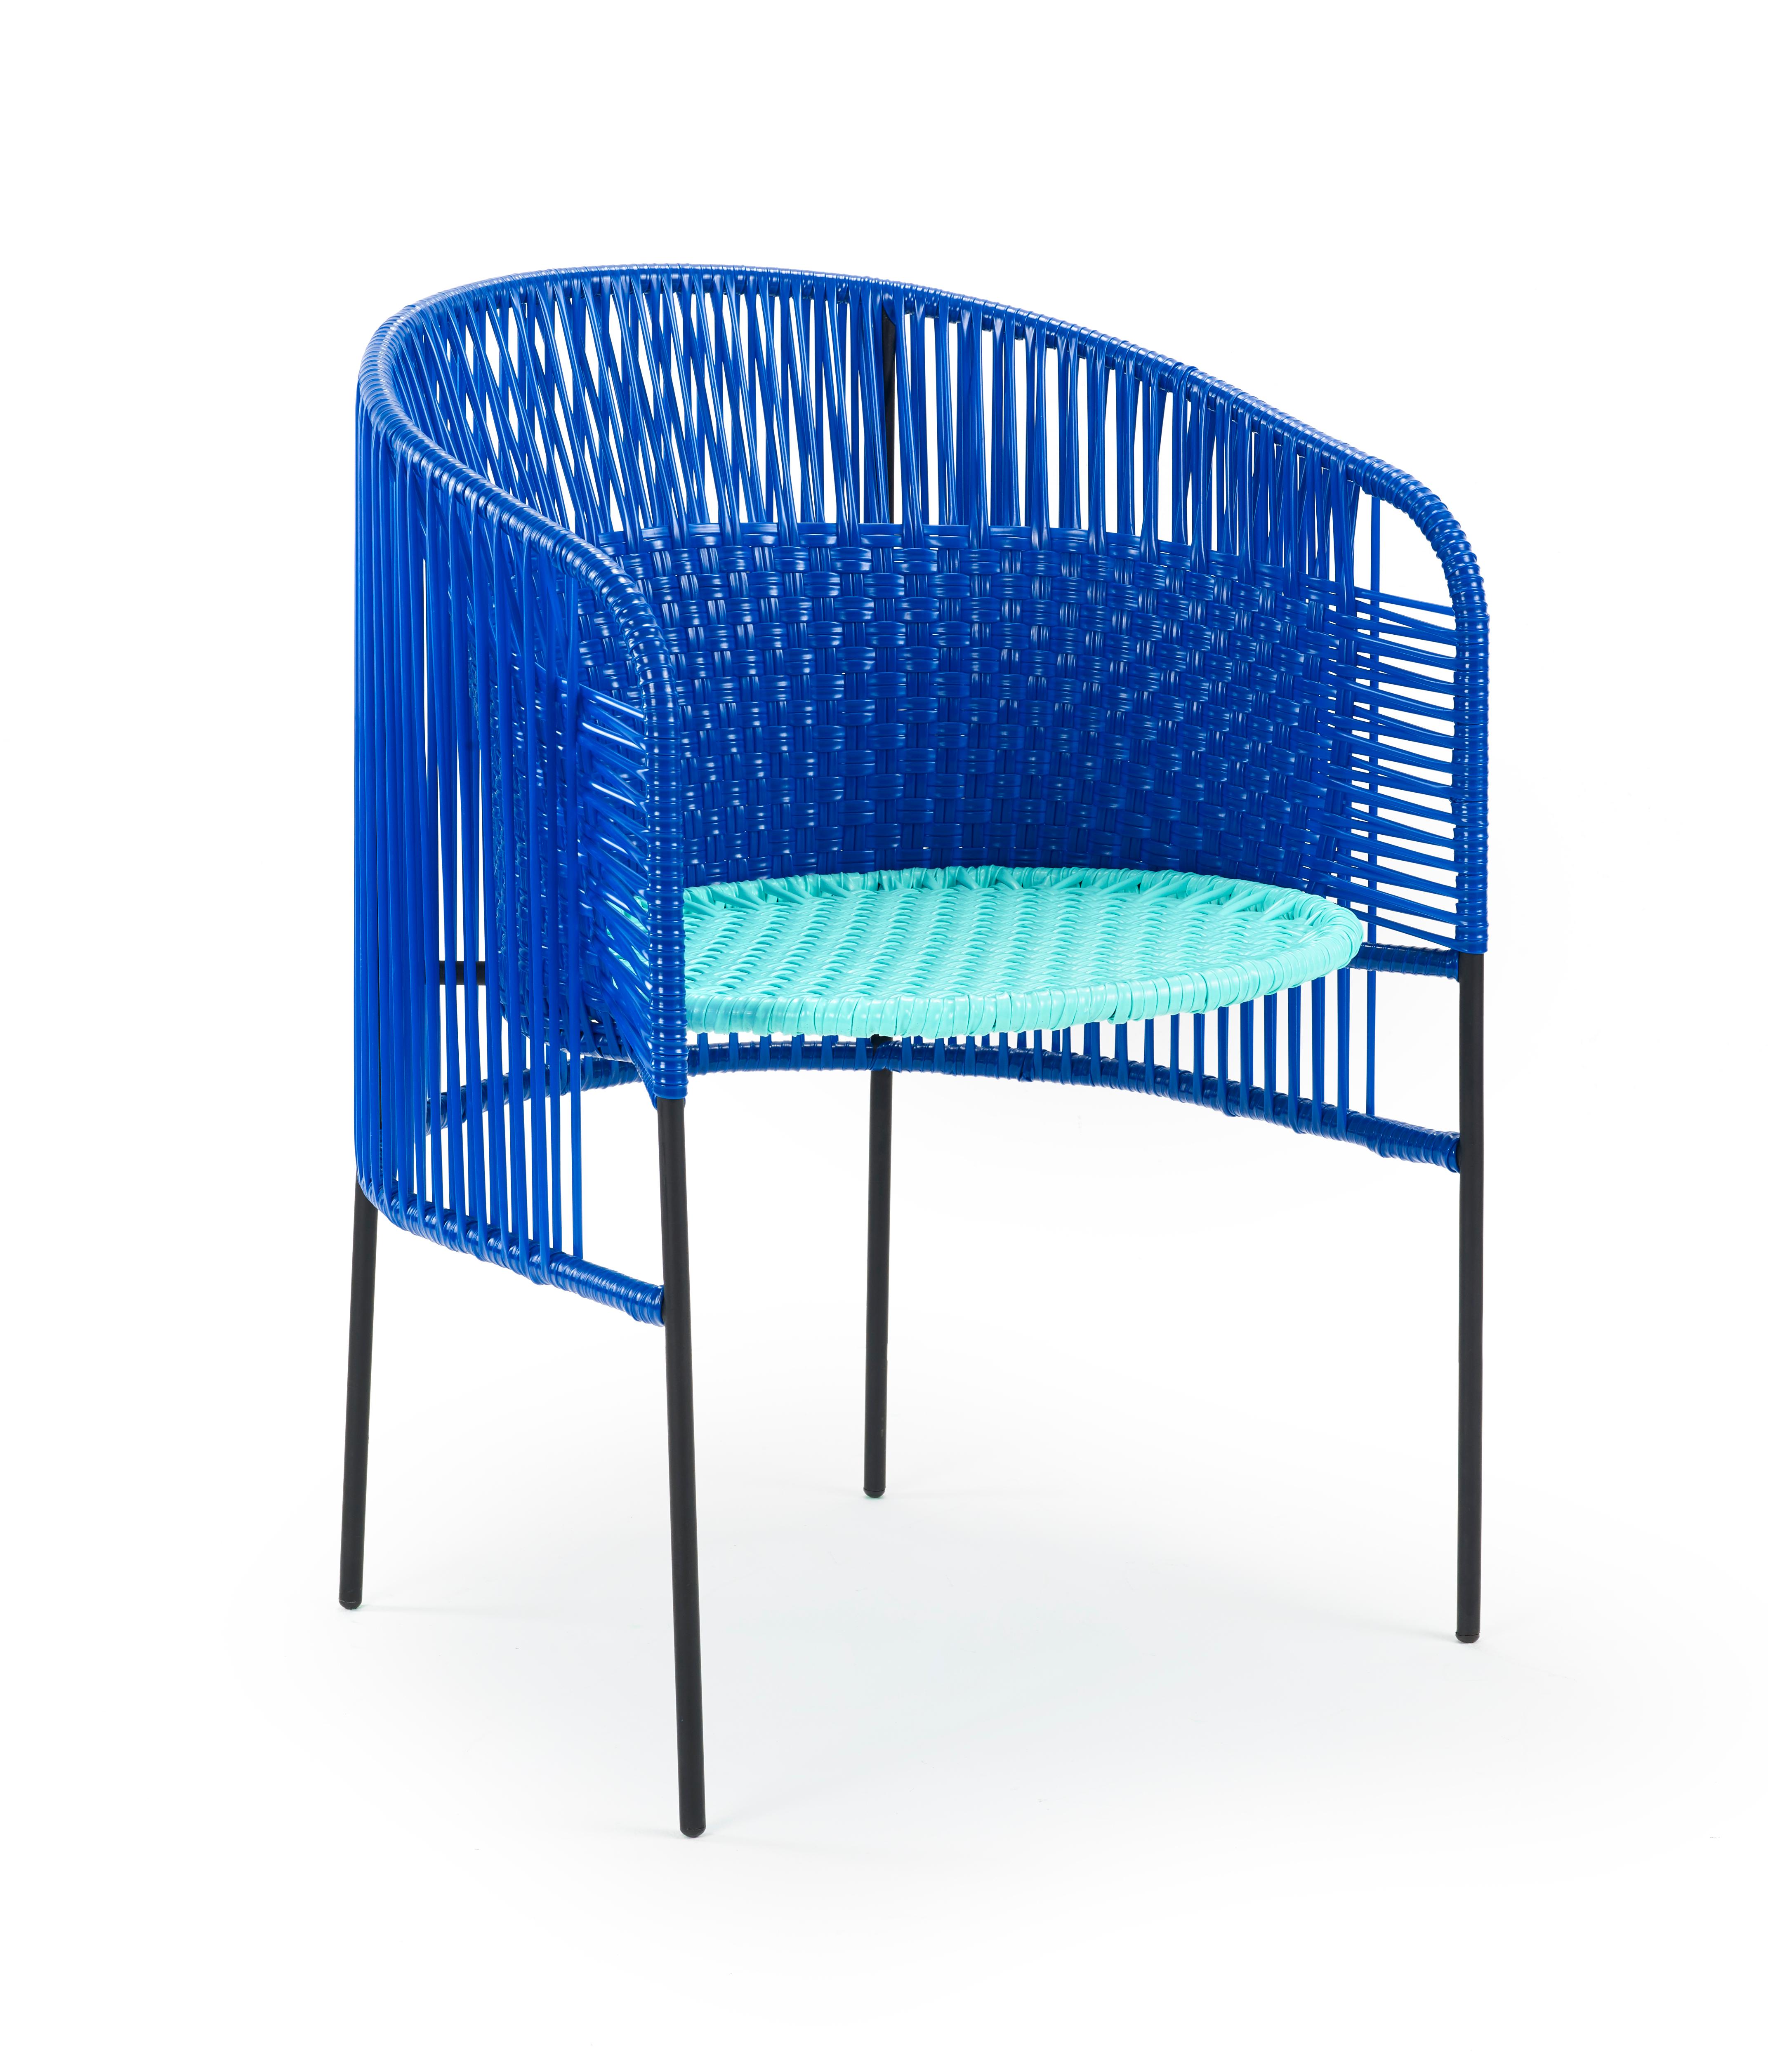 Set of 4 Blue caribe dining chair by Sebastian Herkner
Materials: Galvanized and powder-coated tubular steel. PVC strings are made from recycled plastic.
Technique: Made from recycled plastic and weaved by local craftspeople in Colombia.